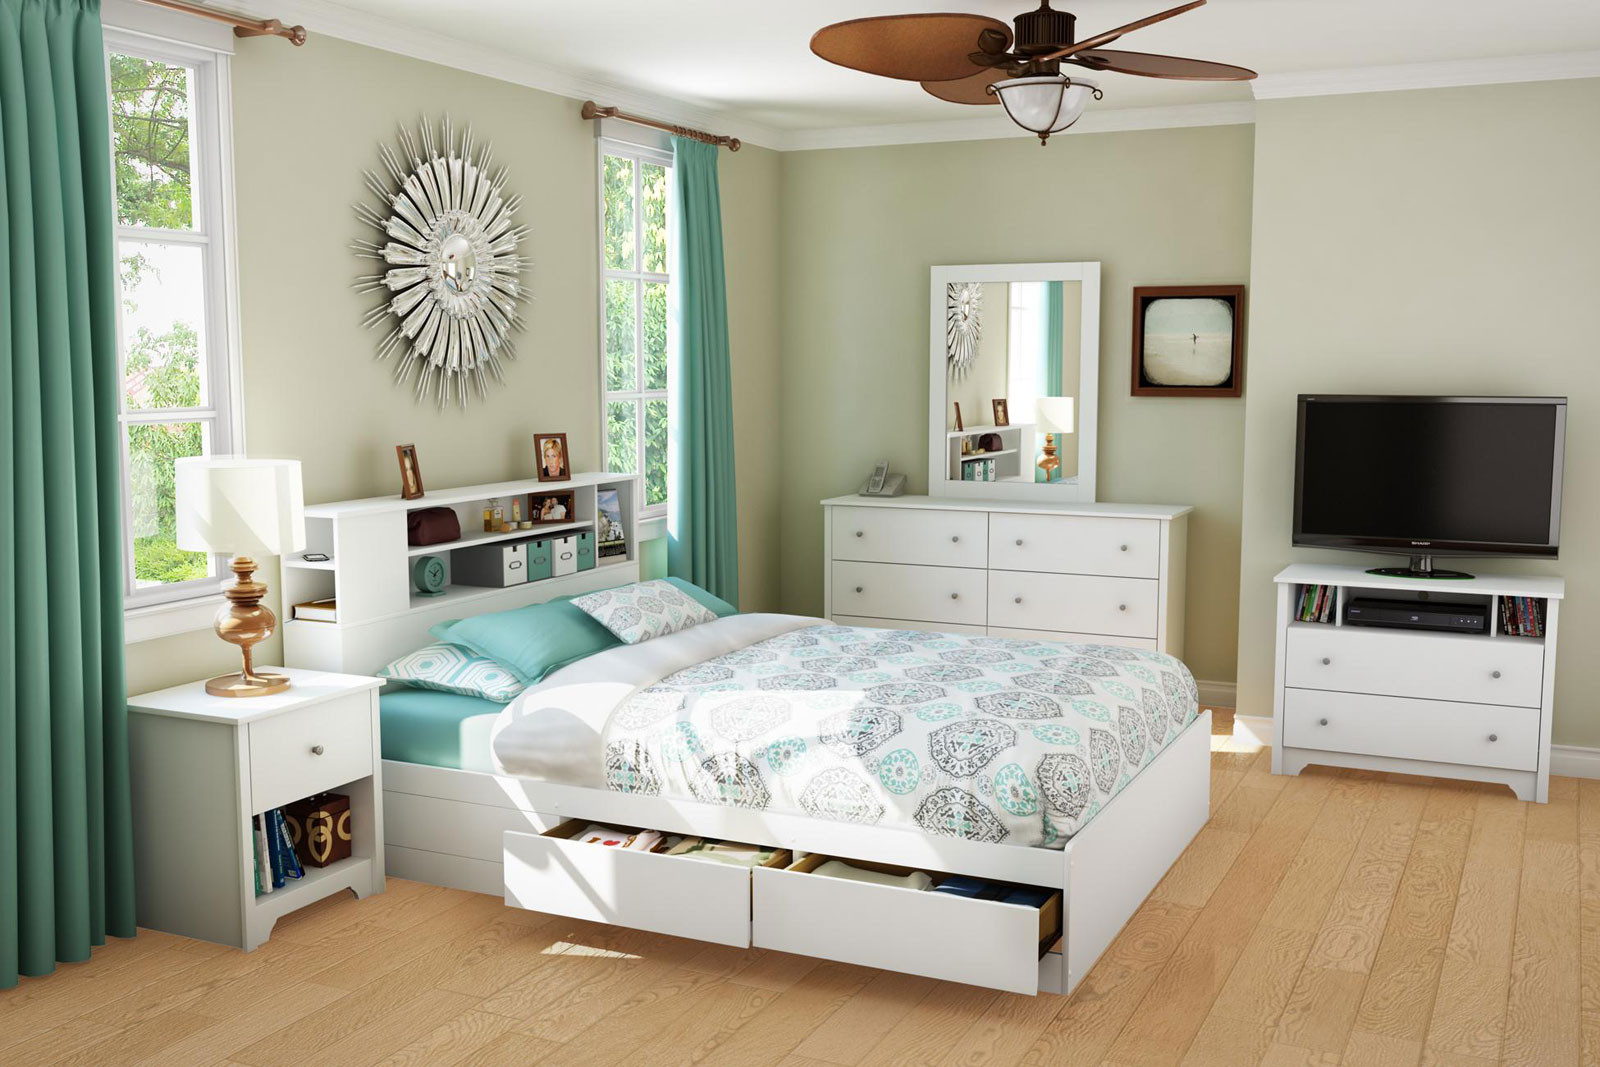 Queen Bedroom Sets With Storage
 Queen Bedroom Sets For The Modern Style Amaza Design